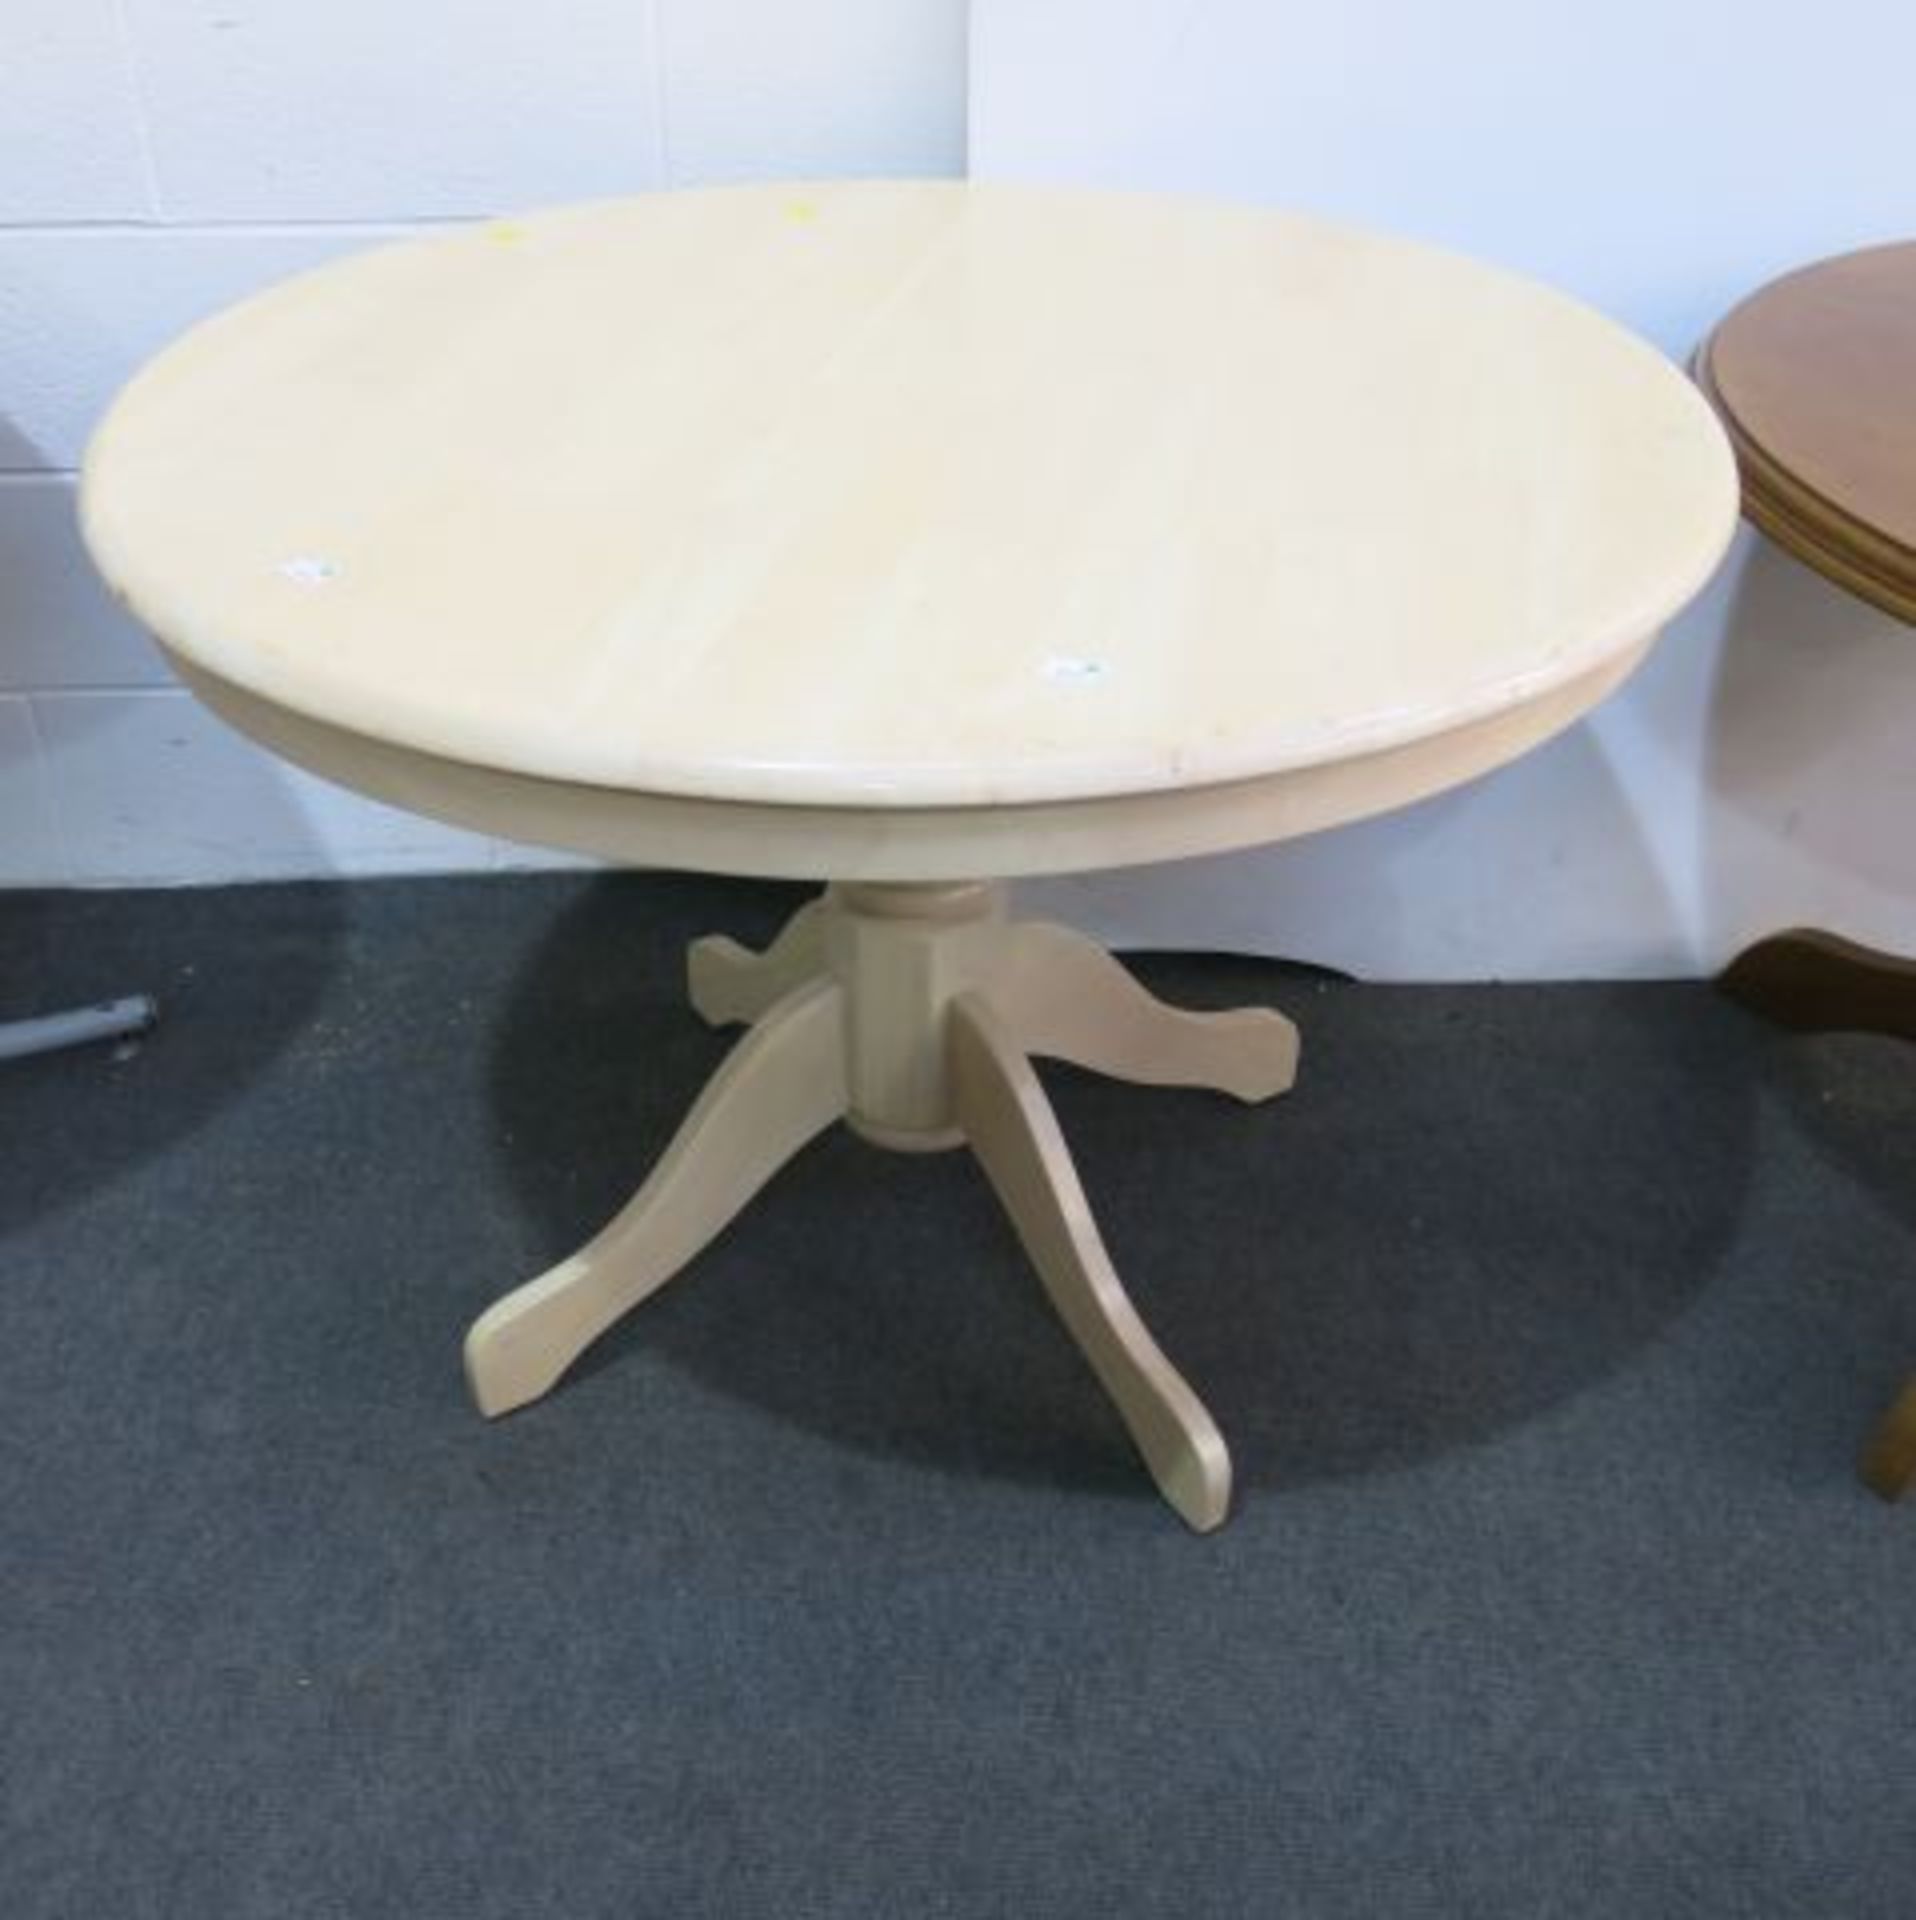 Four Tables. Two Pine Tables 90cm in diameter on Grey Painted Metal Supports, A Bleached Pine - Image 3 of 4